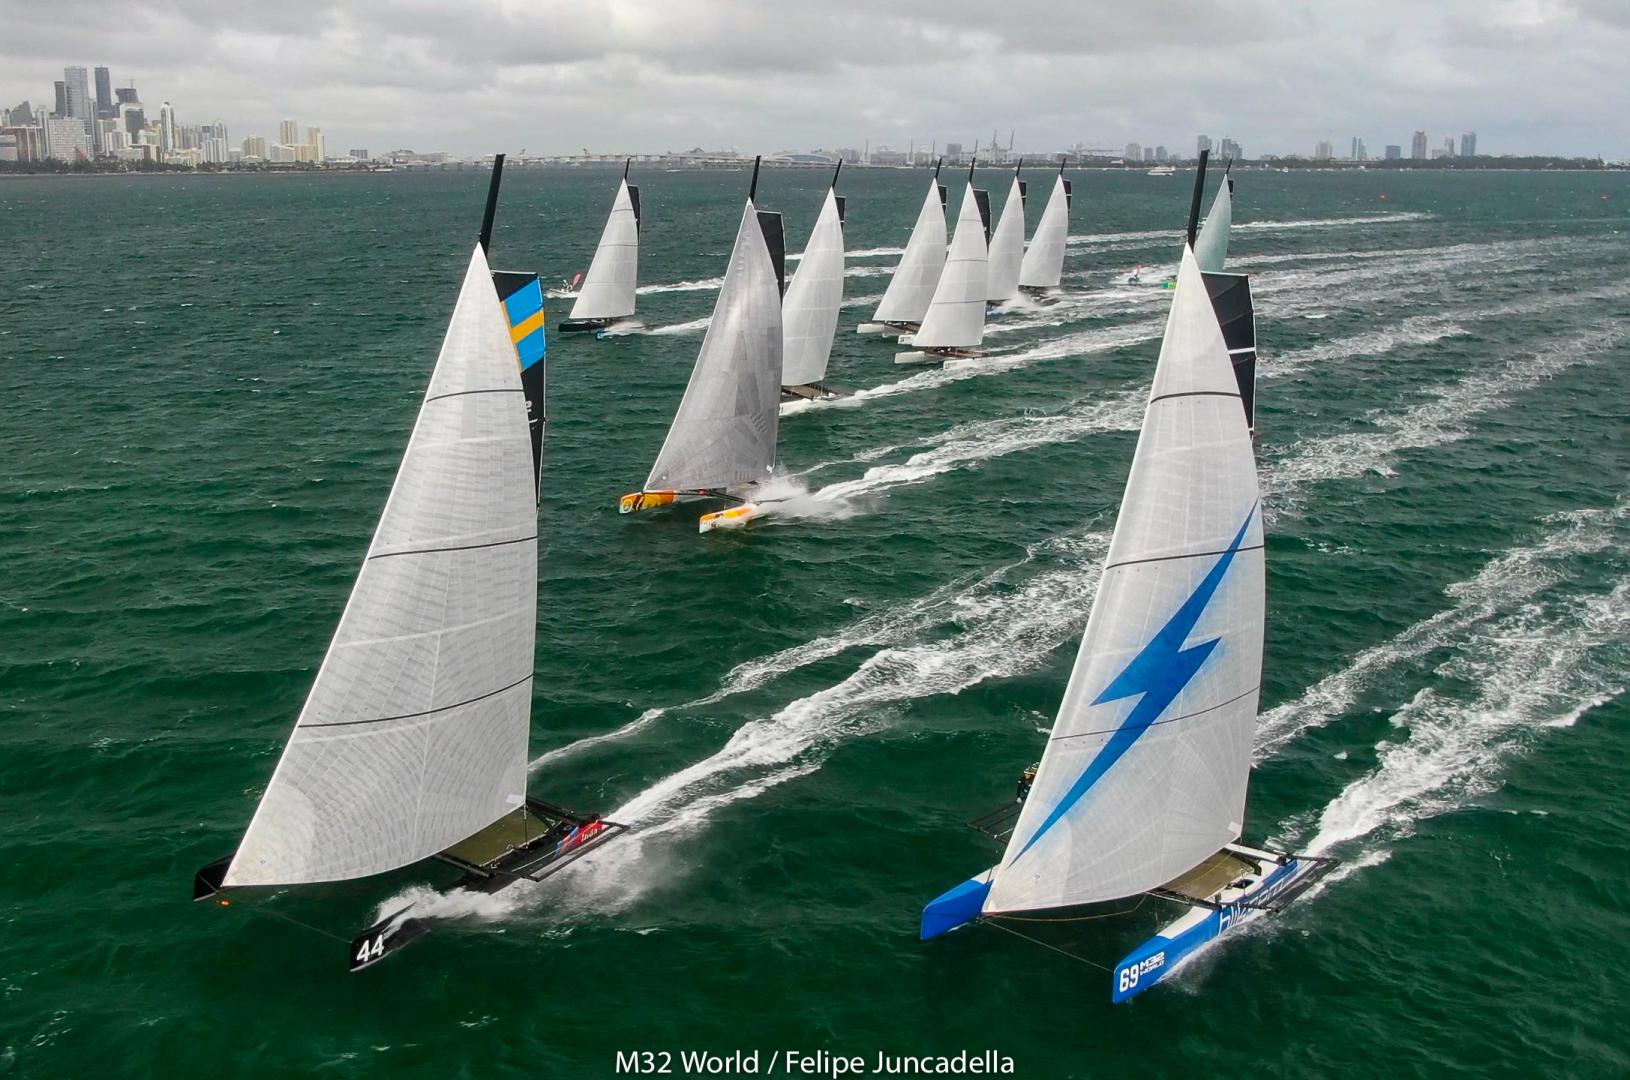 Moving day at the M32 Worlds